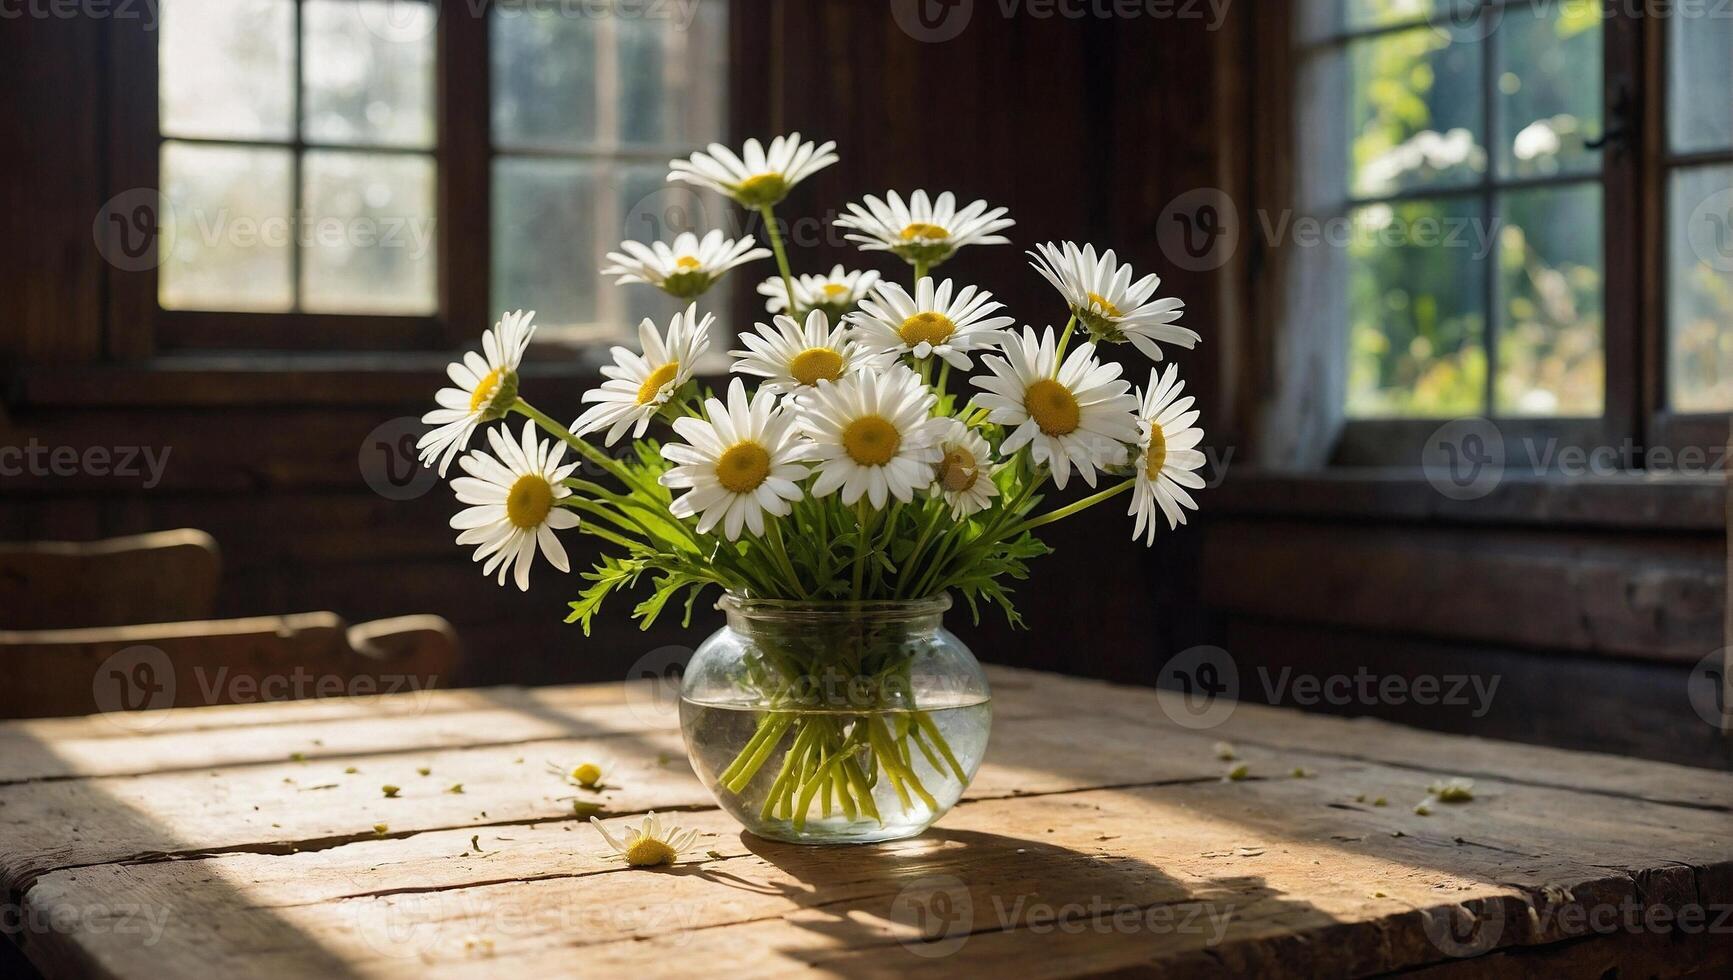 Bouquet of white daisies with bright yellow centres in glass vase resting on a rustic wooden table photo